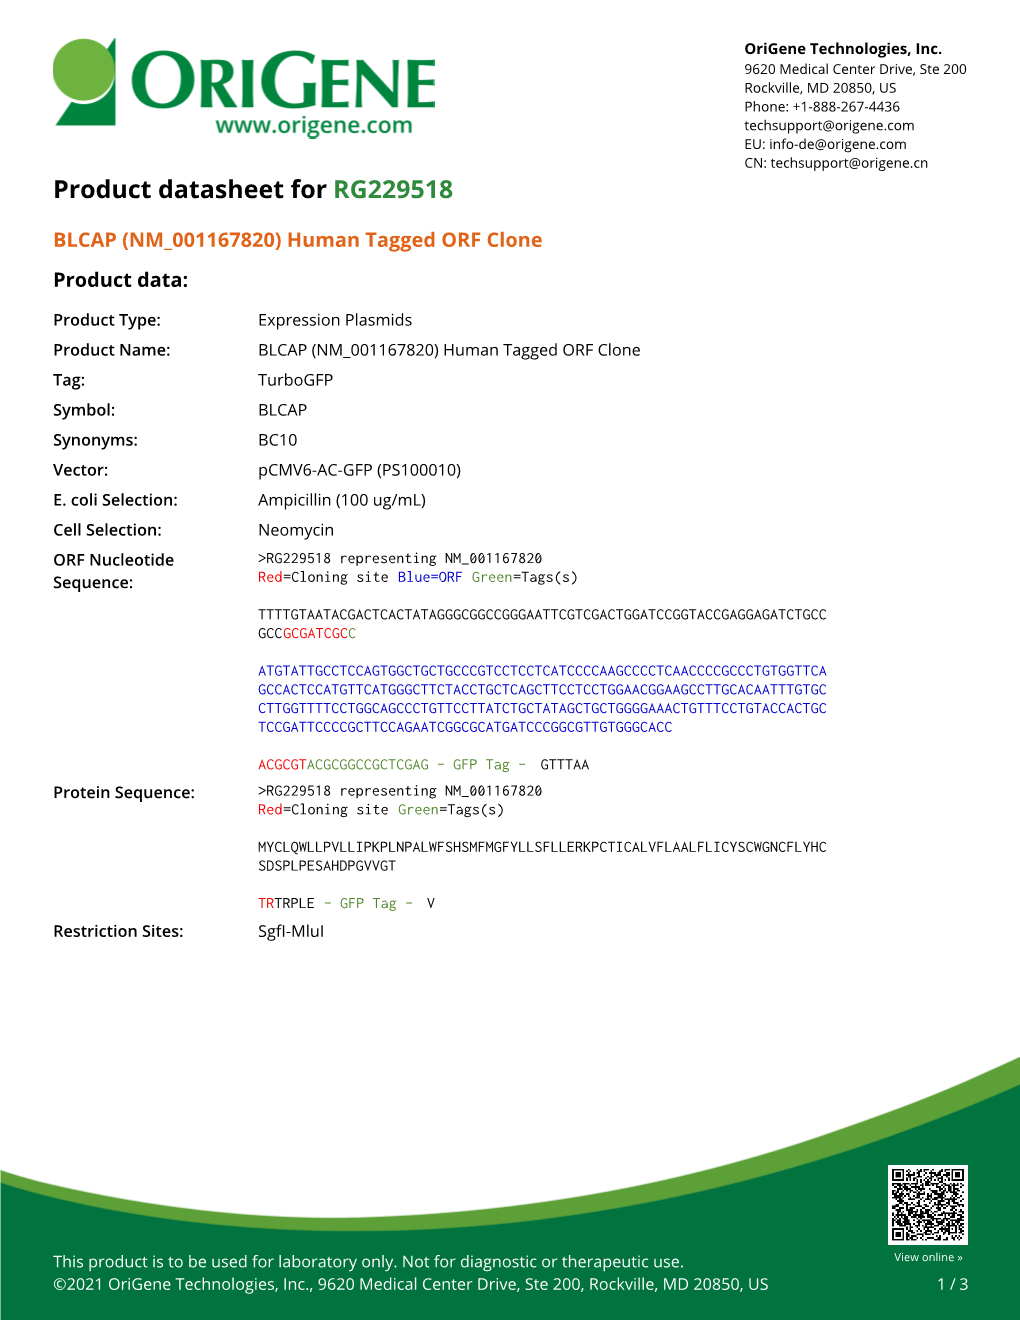 BLCAP (NM 001167820) Human Tagged ORF Clone Product Data